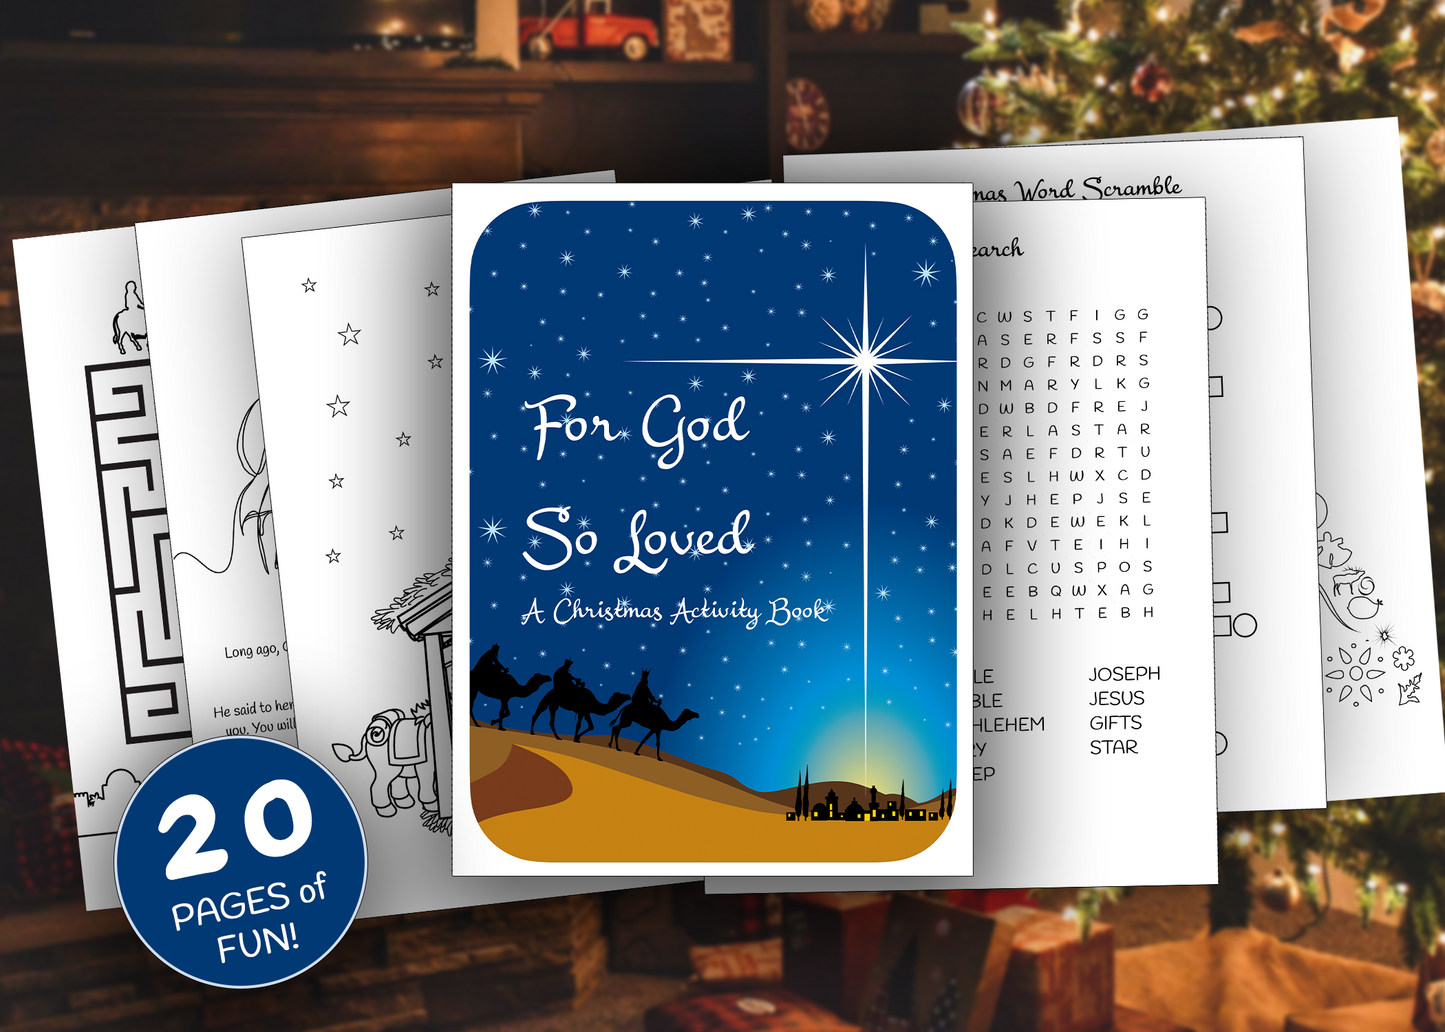 For God So Loved - A Christmas Activity Book